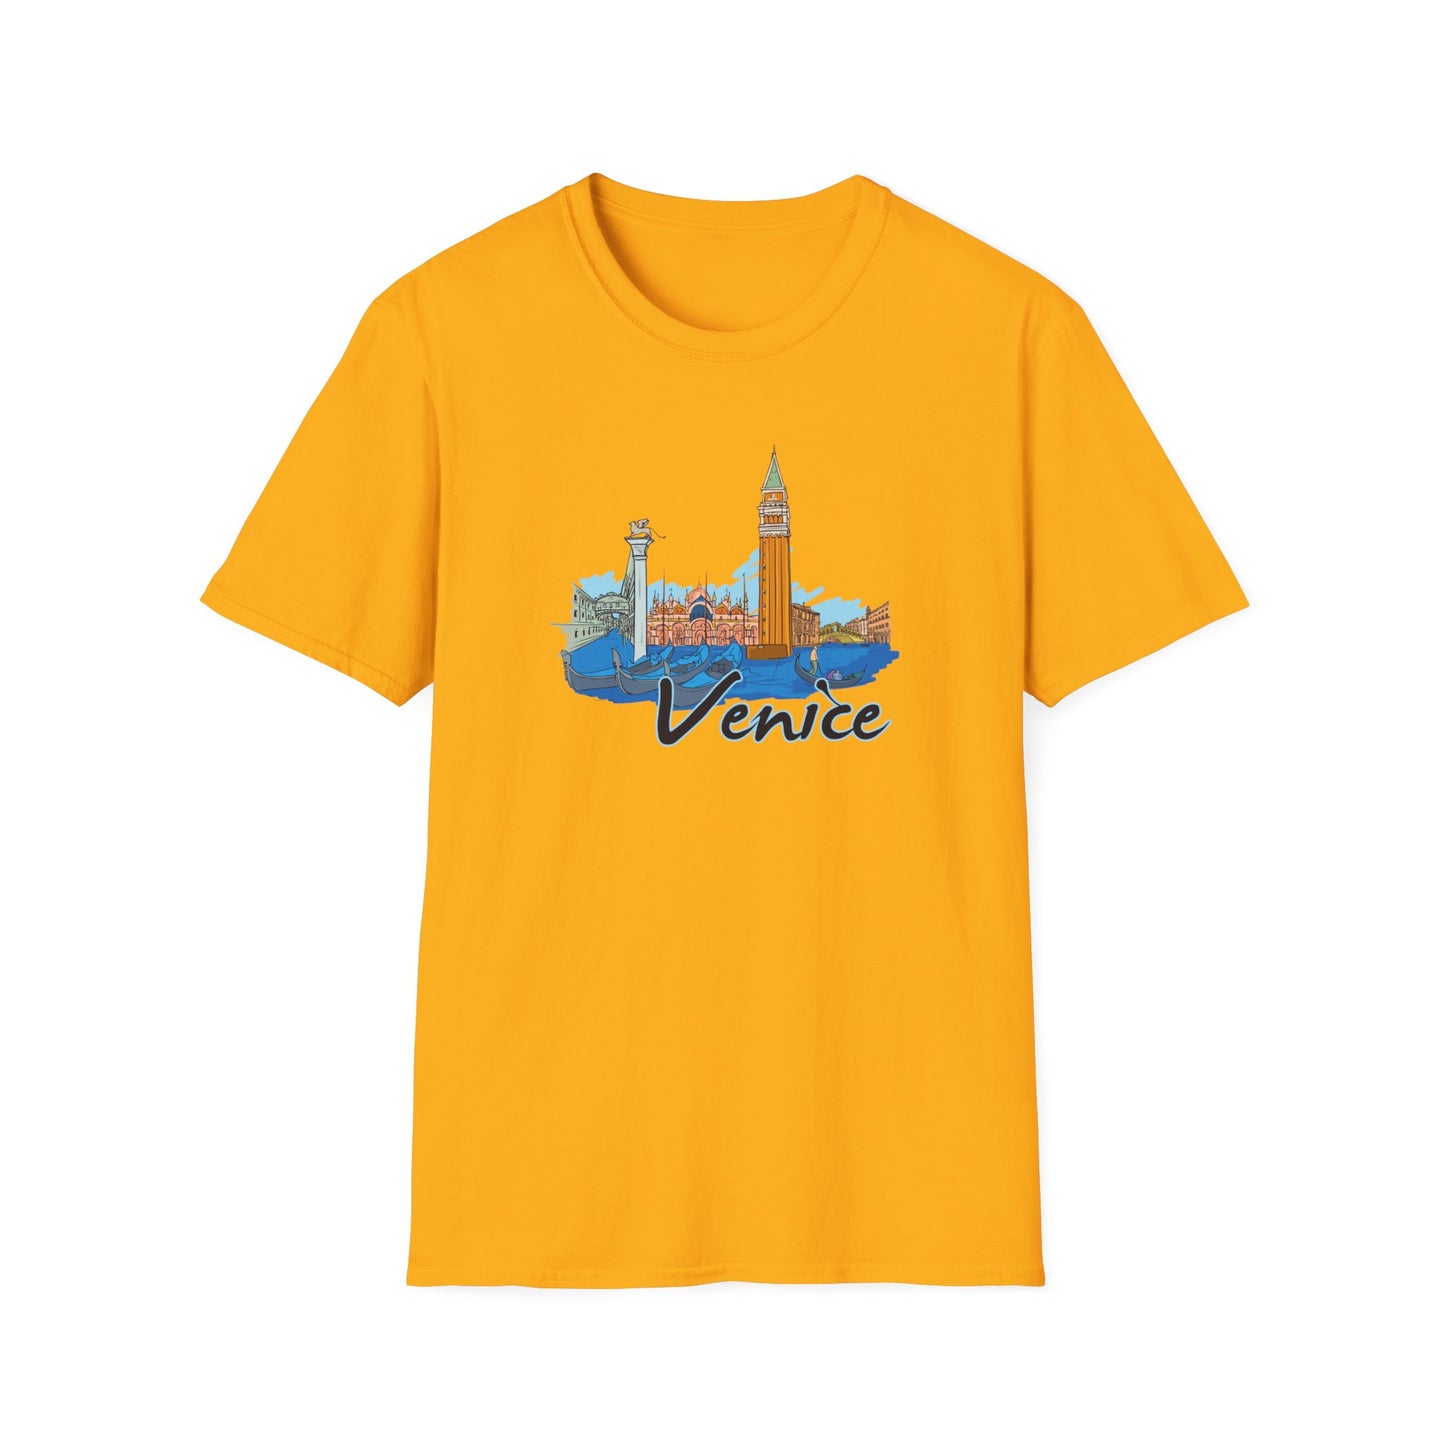 Discover Serenity with Our Venice-Inspired T-Shirt